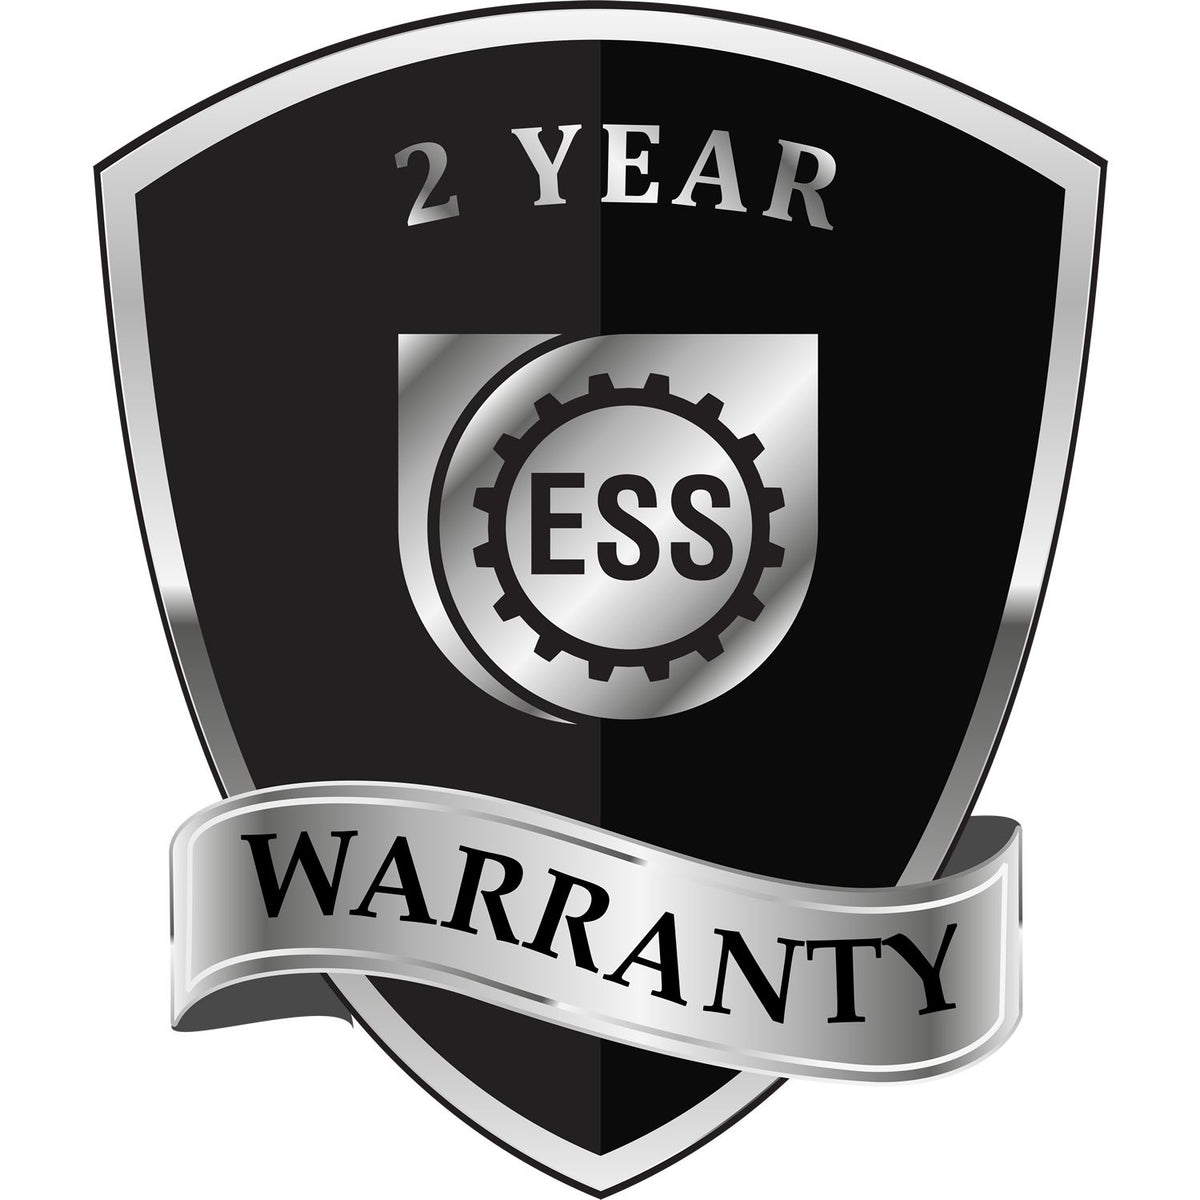 A black and silver badge or emblem showing warranty information for the Massachusetts Geologist Desk Seal